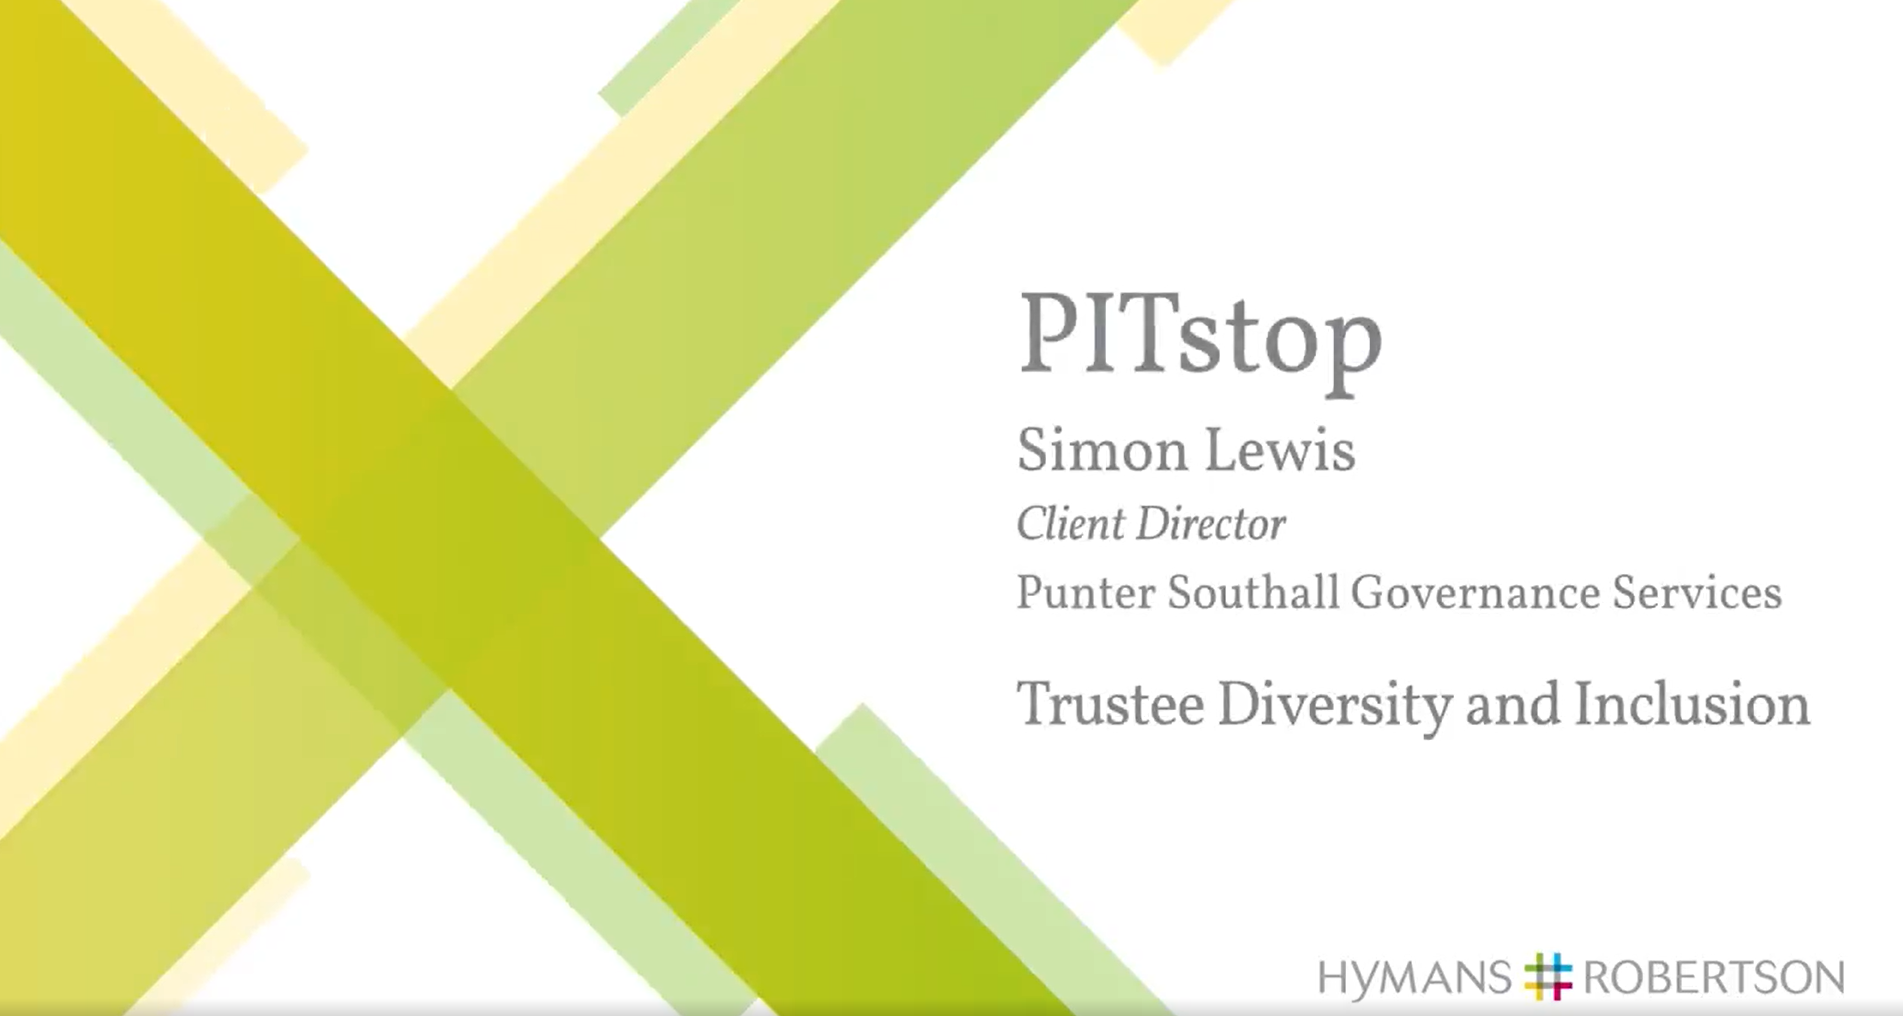 Image for opinion “ PITstop with Simon Lewis - trustee diversity & inclusion”